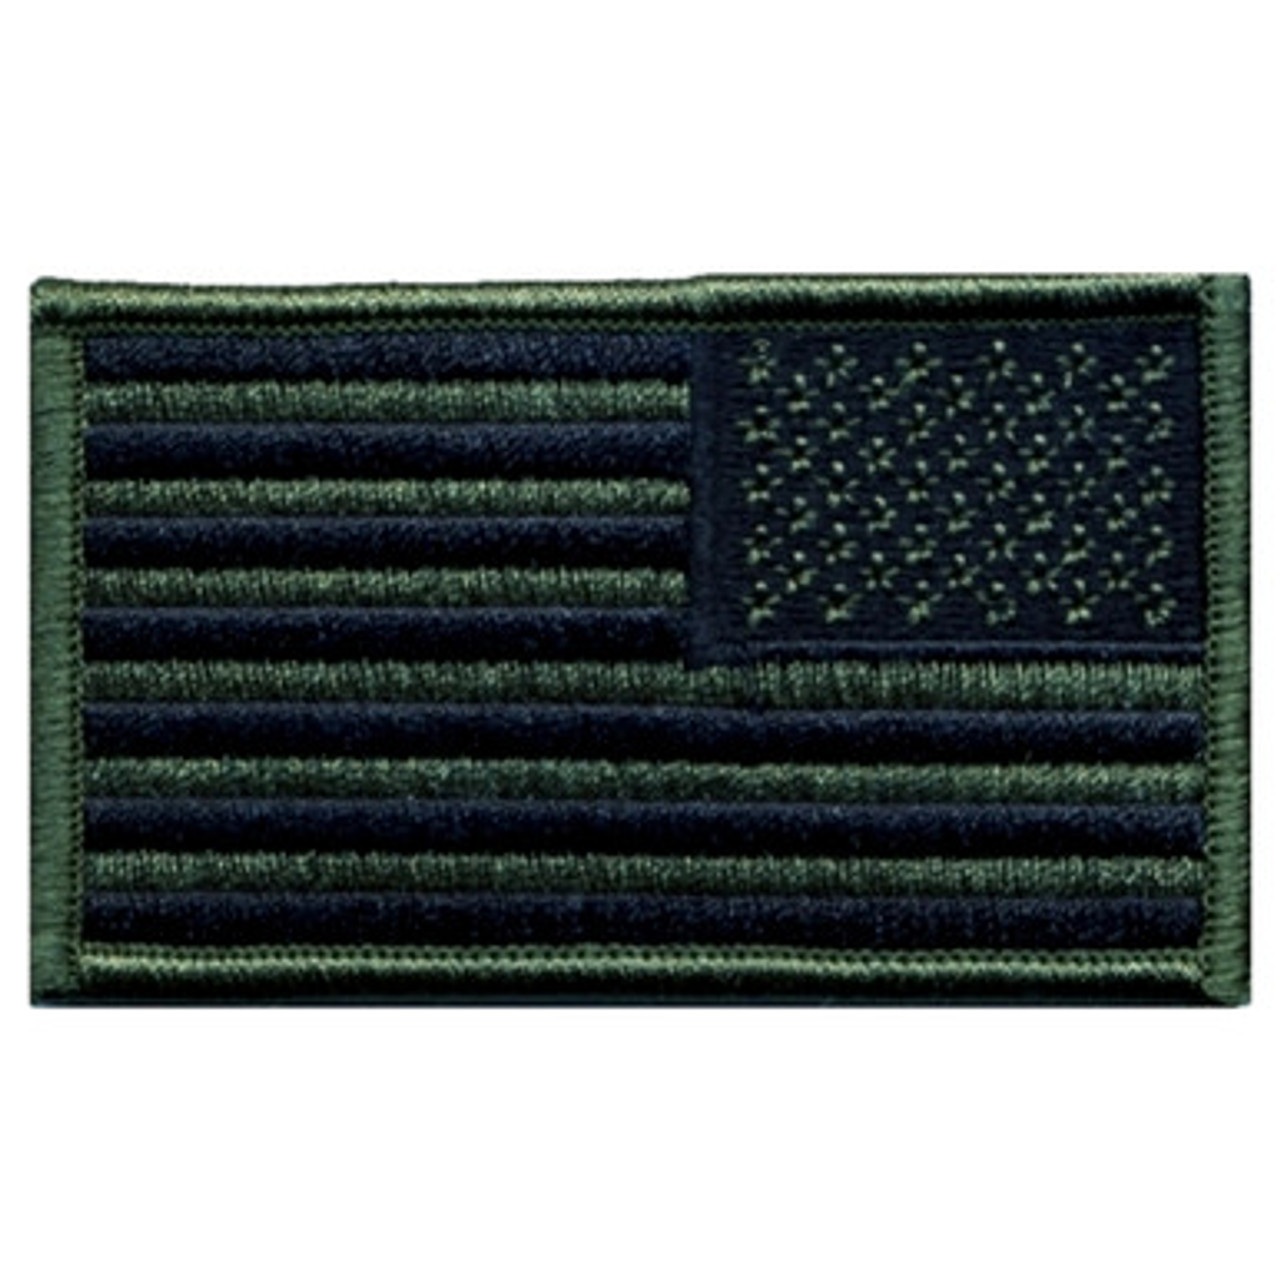 Hero's Pride Full Color Reverse Facing US Flag Patch - 7347